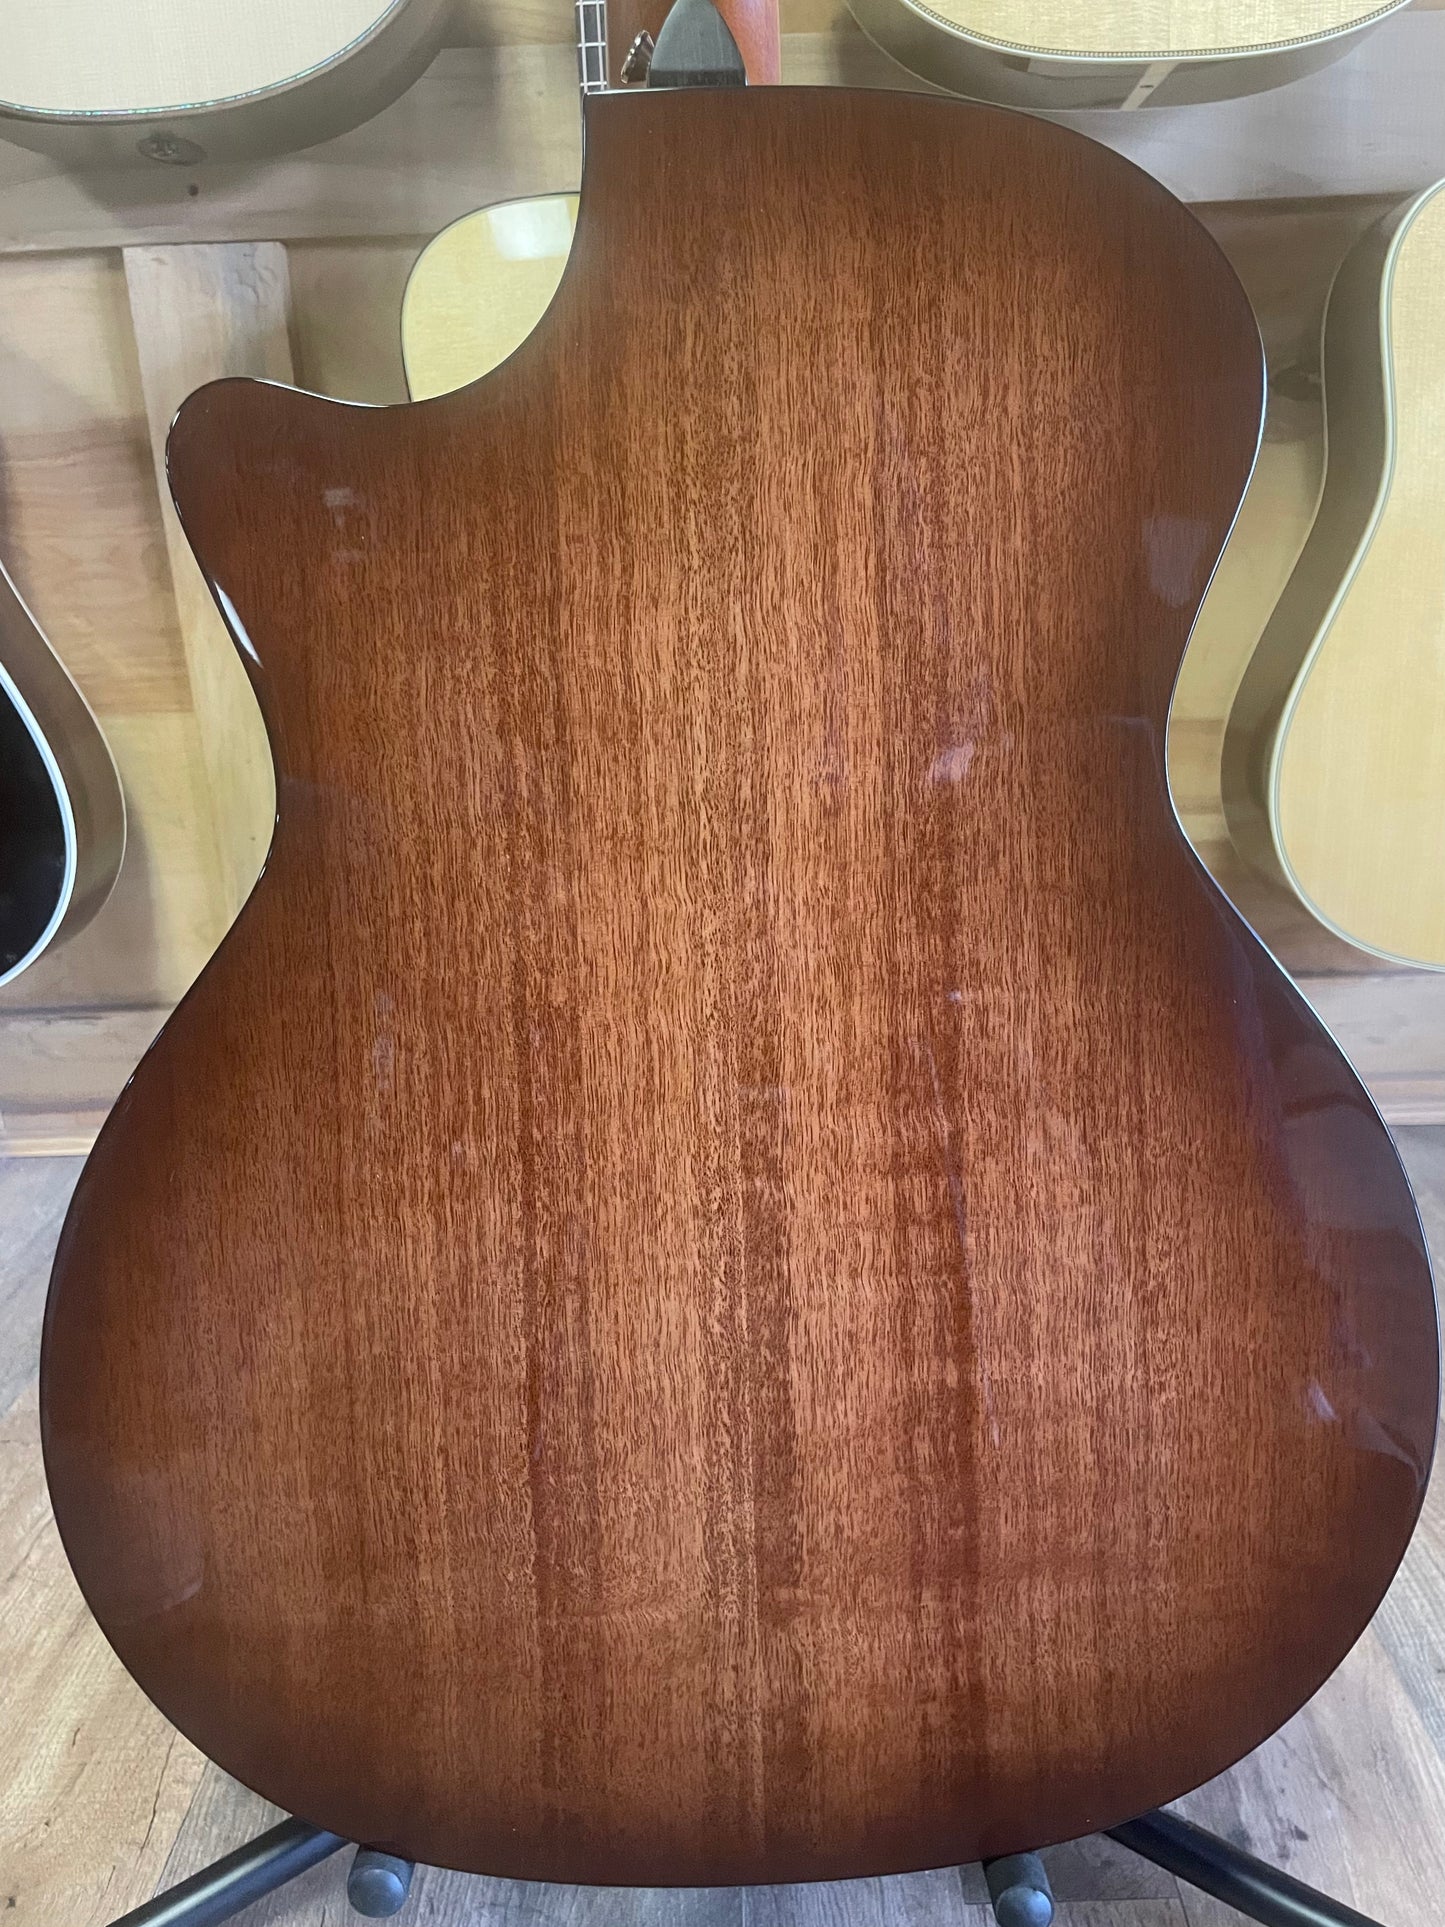 Taylor 514ce (NEW)